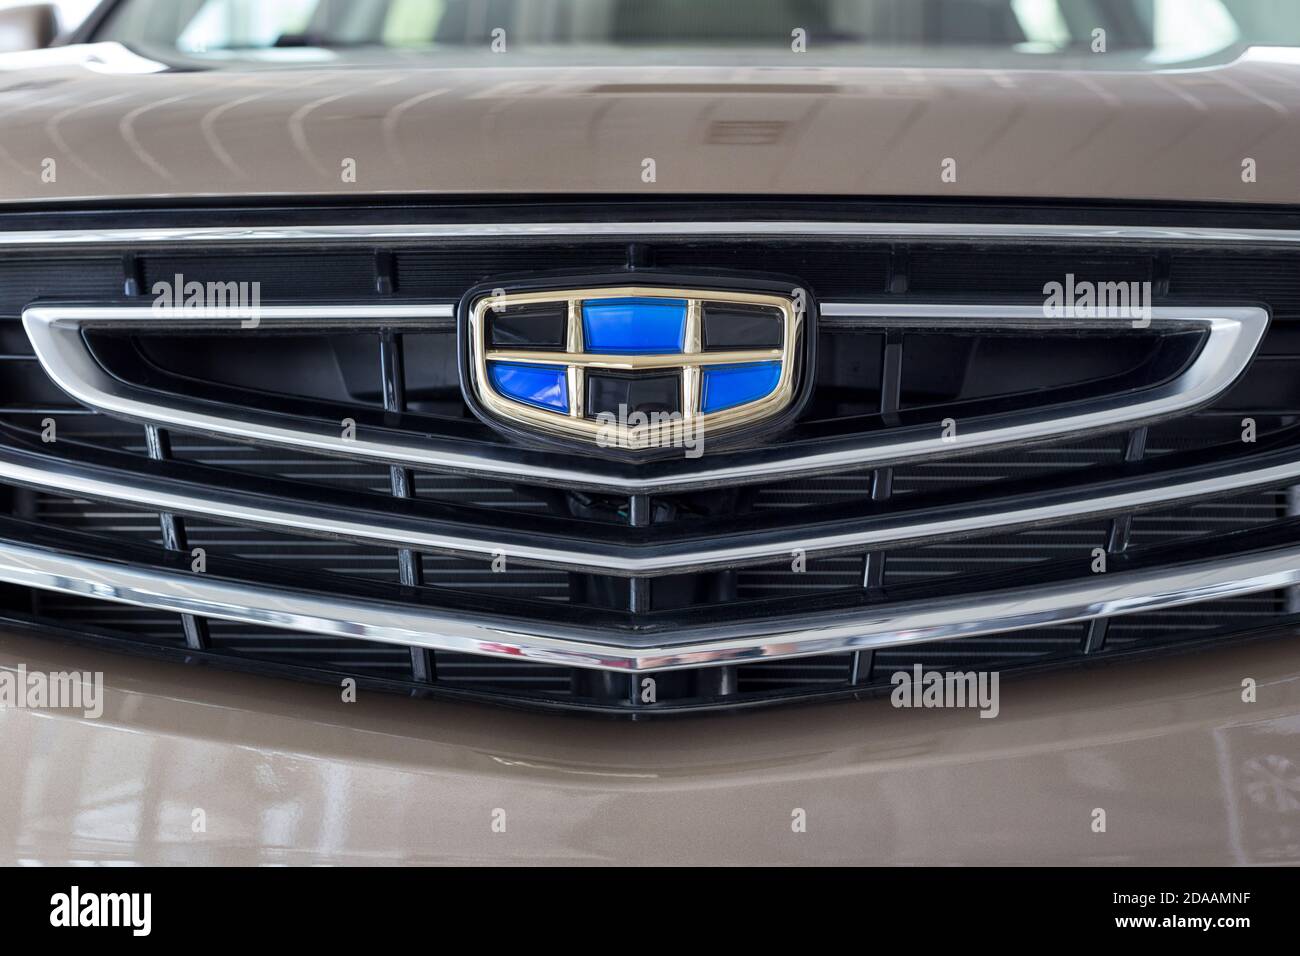 Russia, Izhevsk - August 14, 2020: Geely showroom. Logo of Geely brand on bumper of CoolRay car. Car manufacturer from China. Modern transportation. Stock Photo